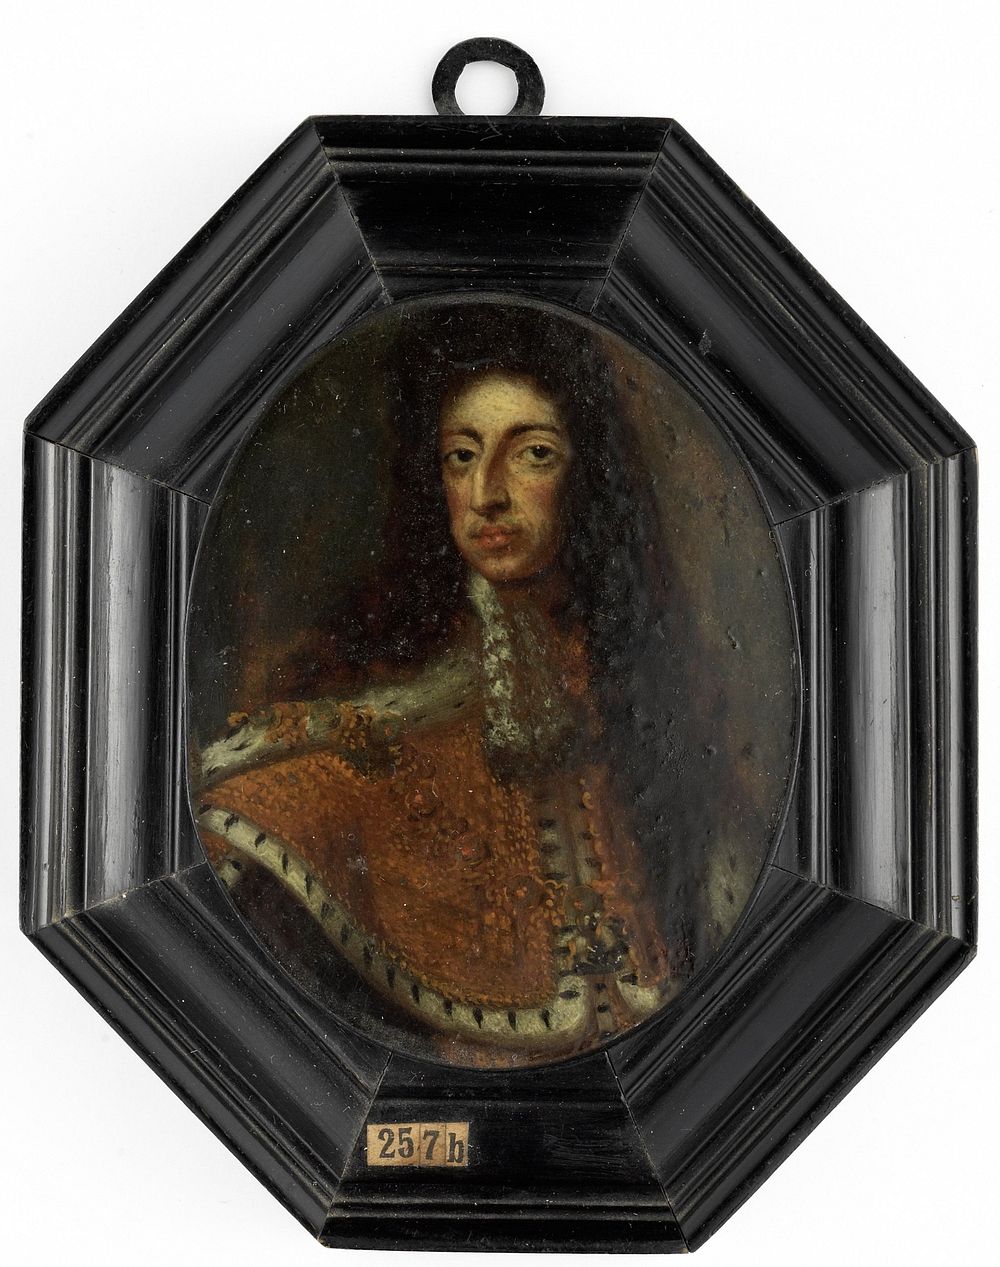 Portrait of William III, Prince of Orange and King of England after 1689 (c. 1695) by anonymous